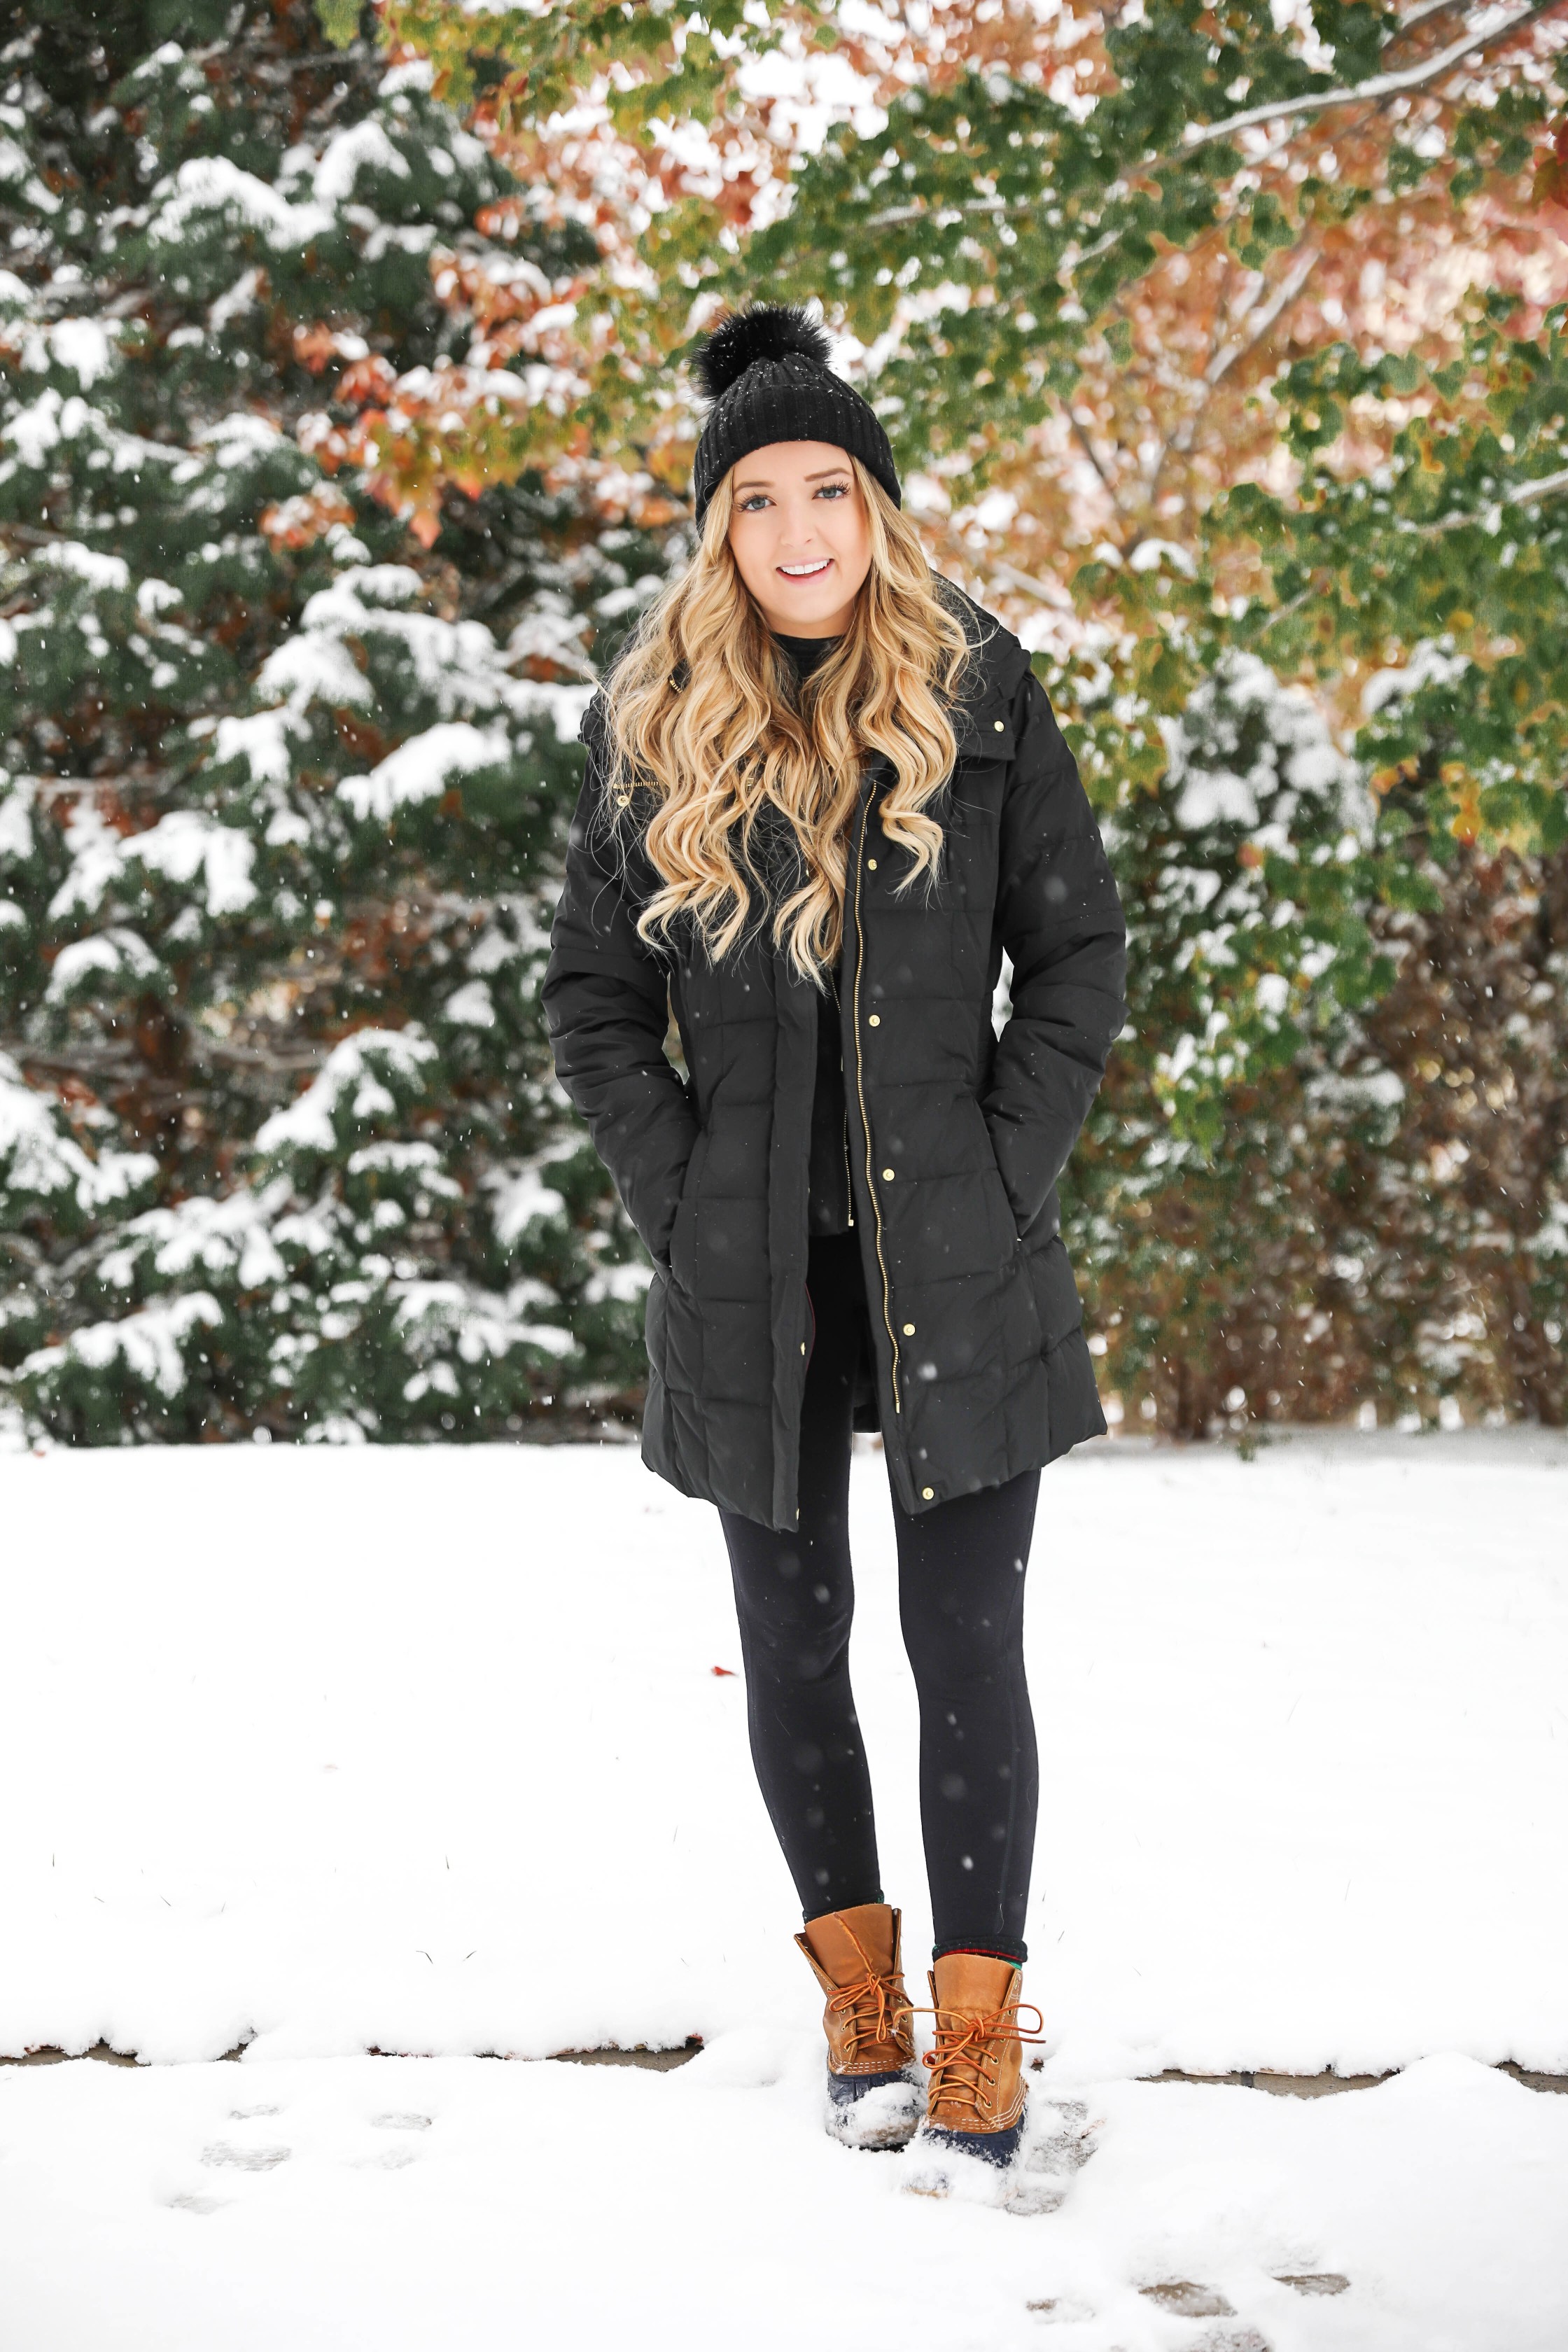 The best winter coat for this winter! This coat is so flattering and warm! It's by Cole Haanm I love these winter photos and the prettiest snow! Details on fashion blog daily dose of charm by lauren lindmark